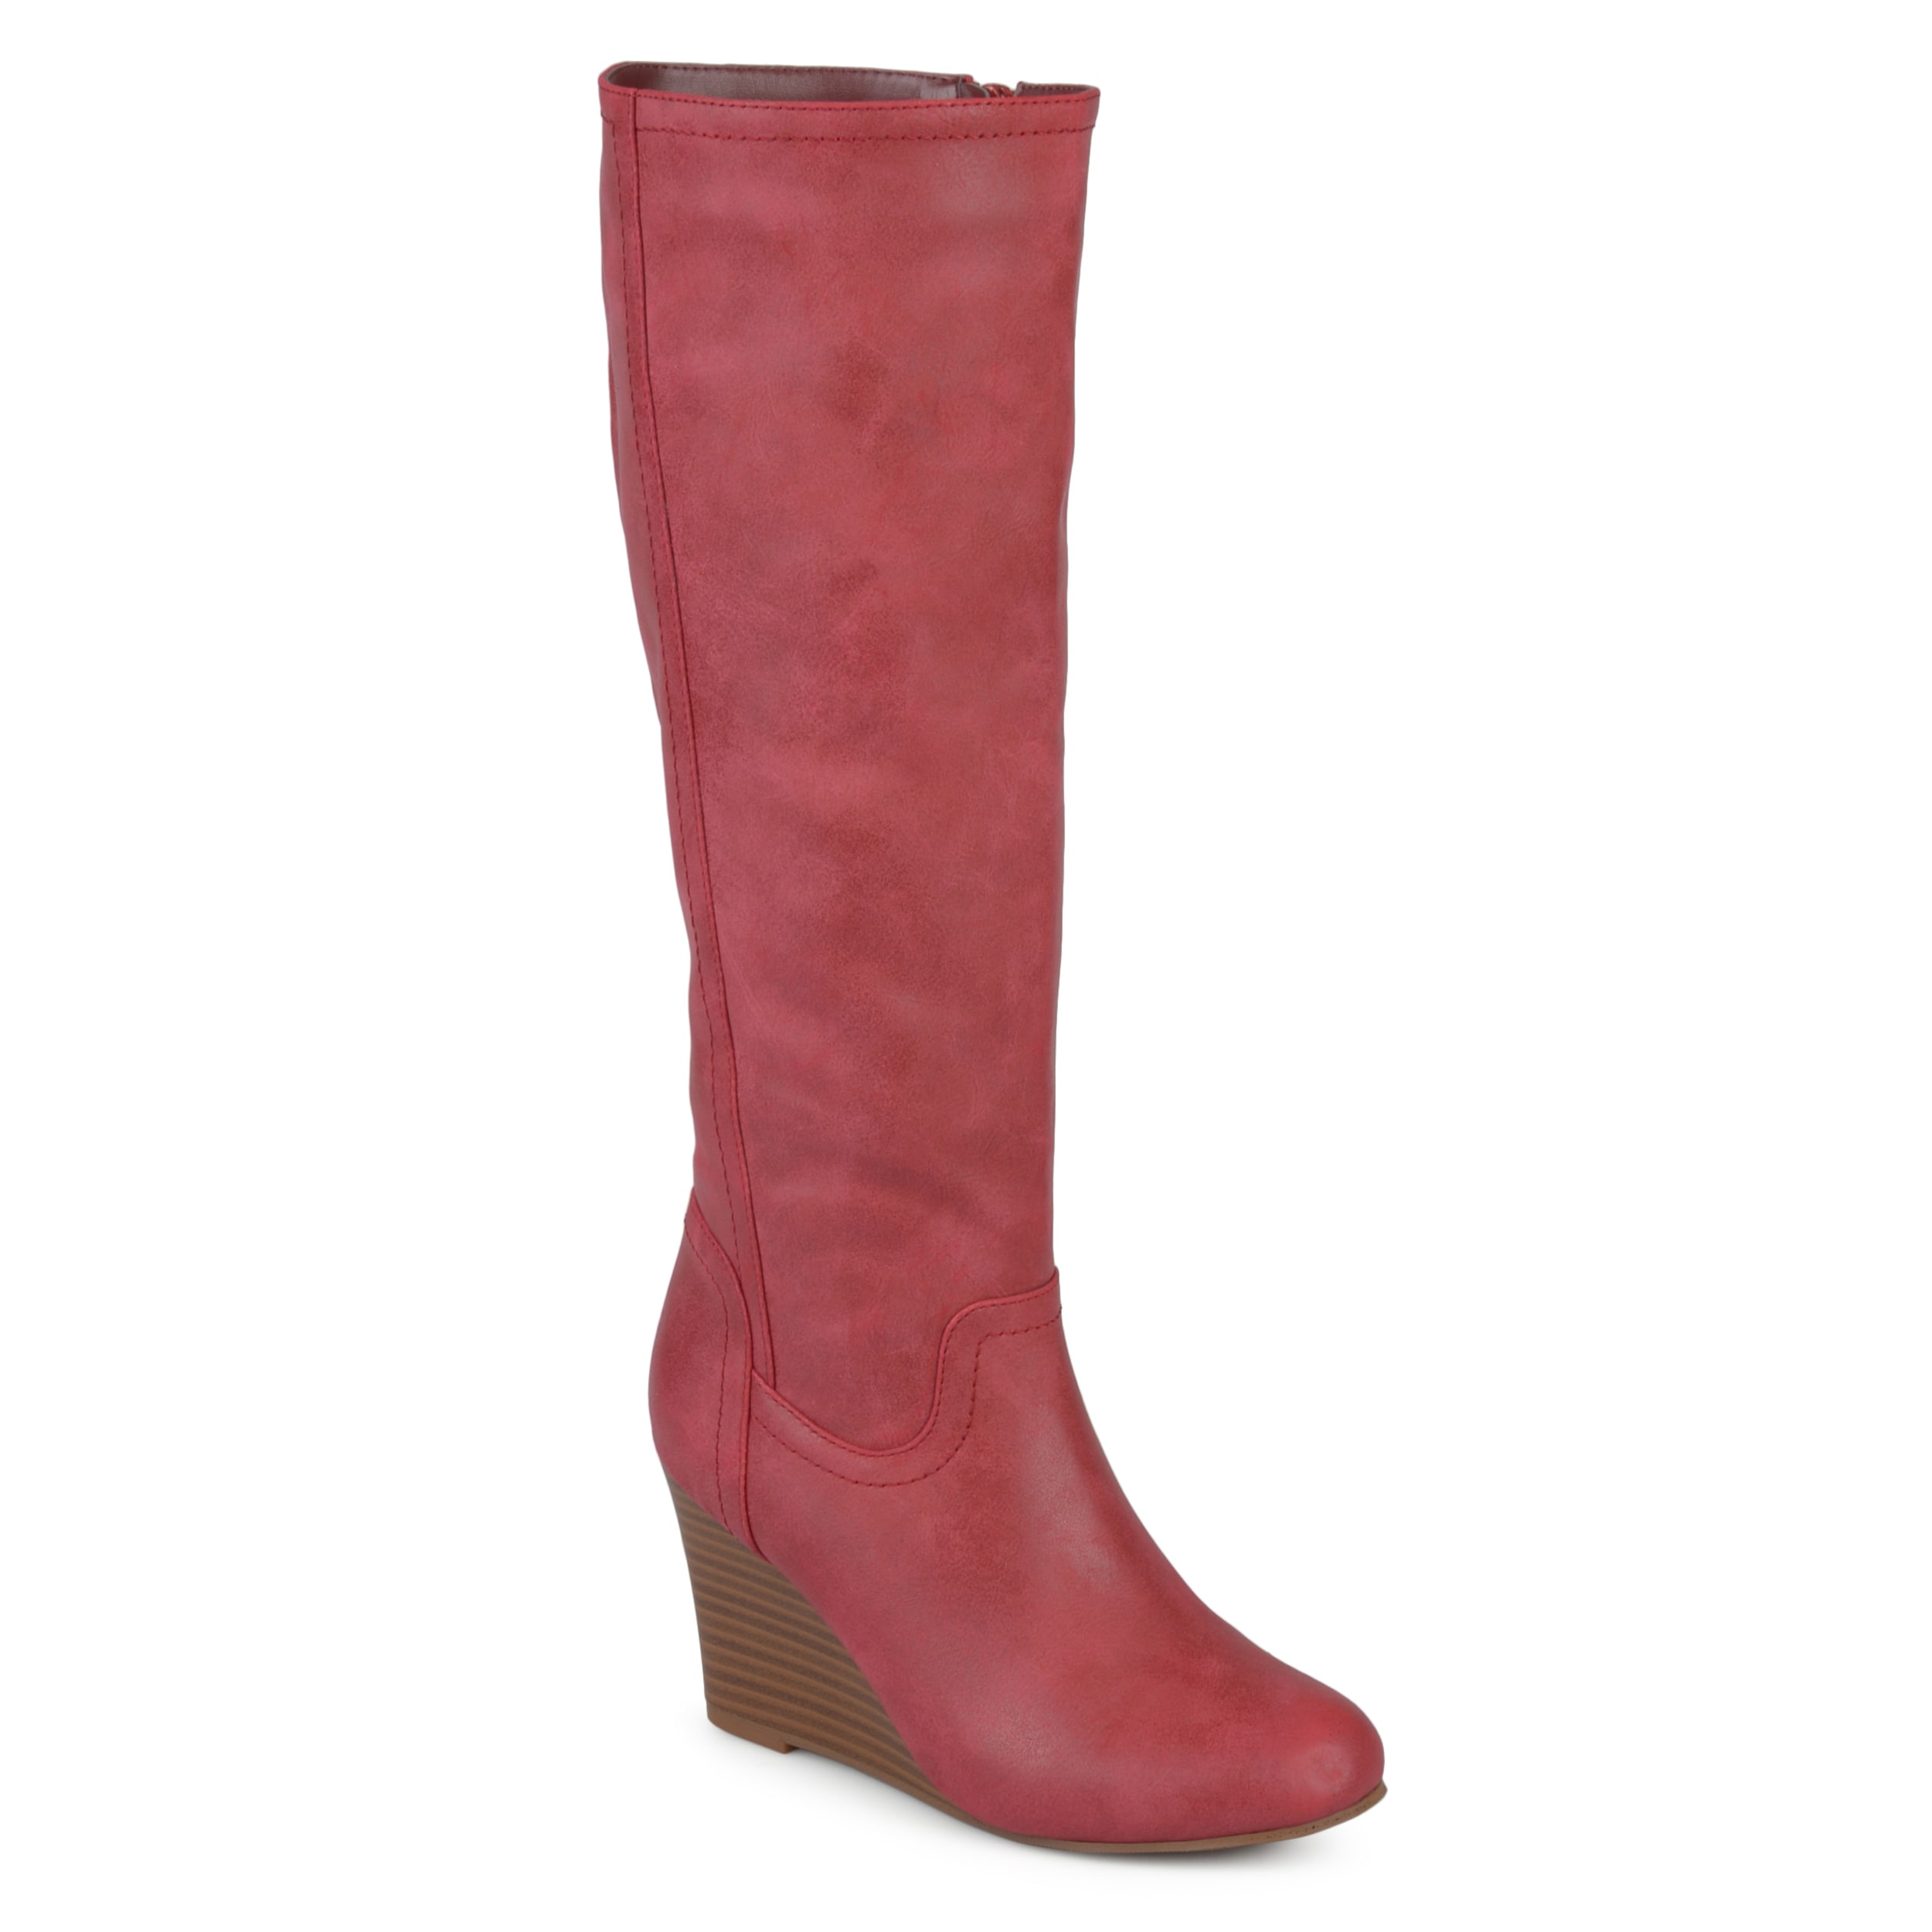 red wide calf boots